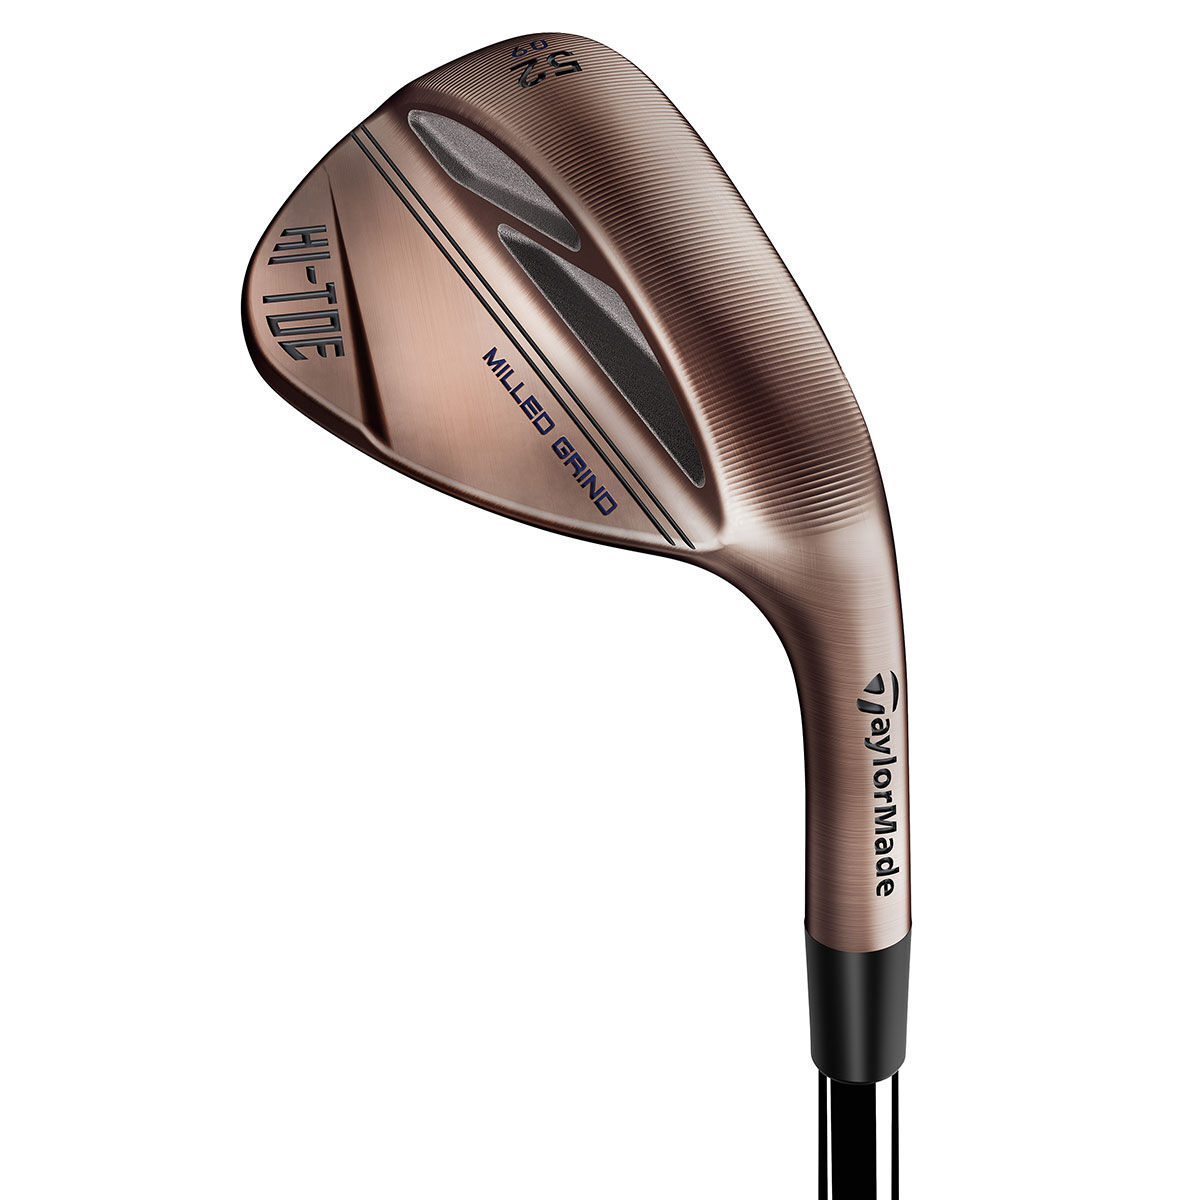 TaylorMade Brown Hi-Toe 3 Left Hand Golf Wedge, Size: 54° | American Golf von TaylorMade